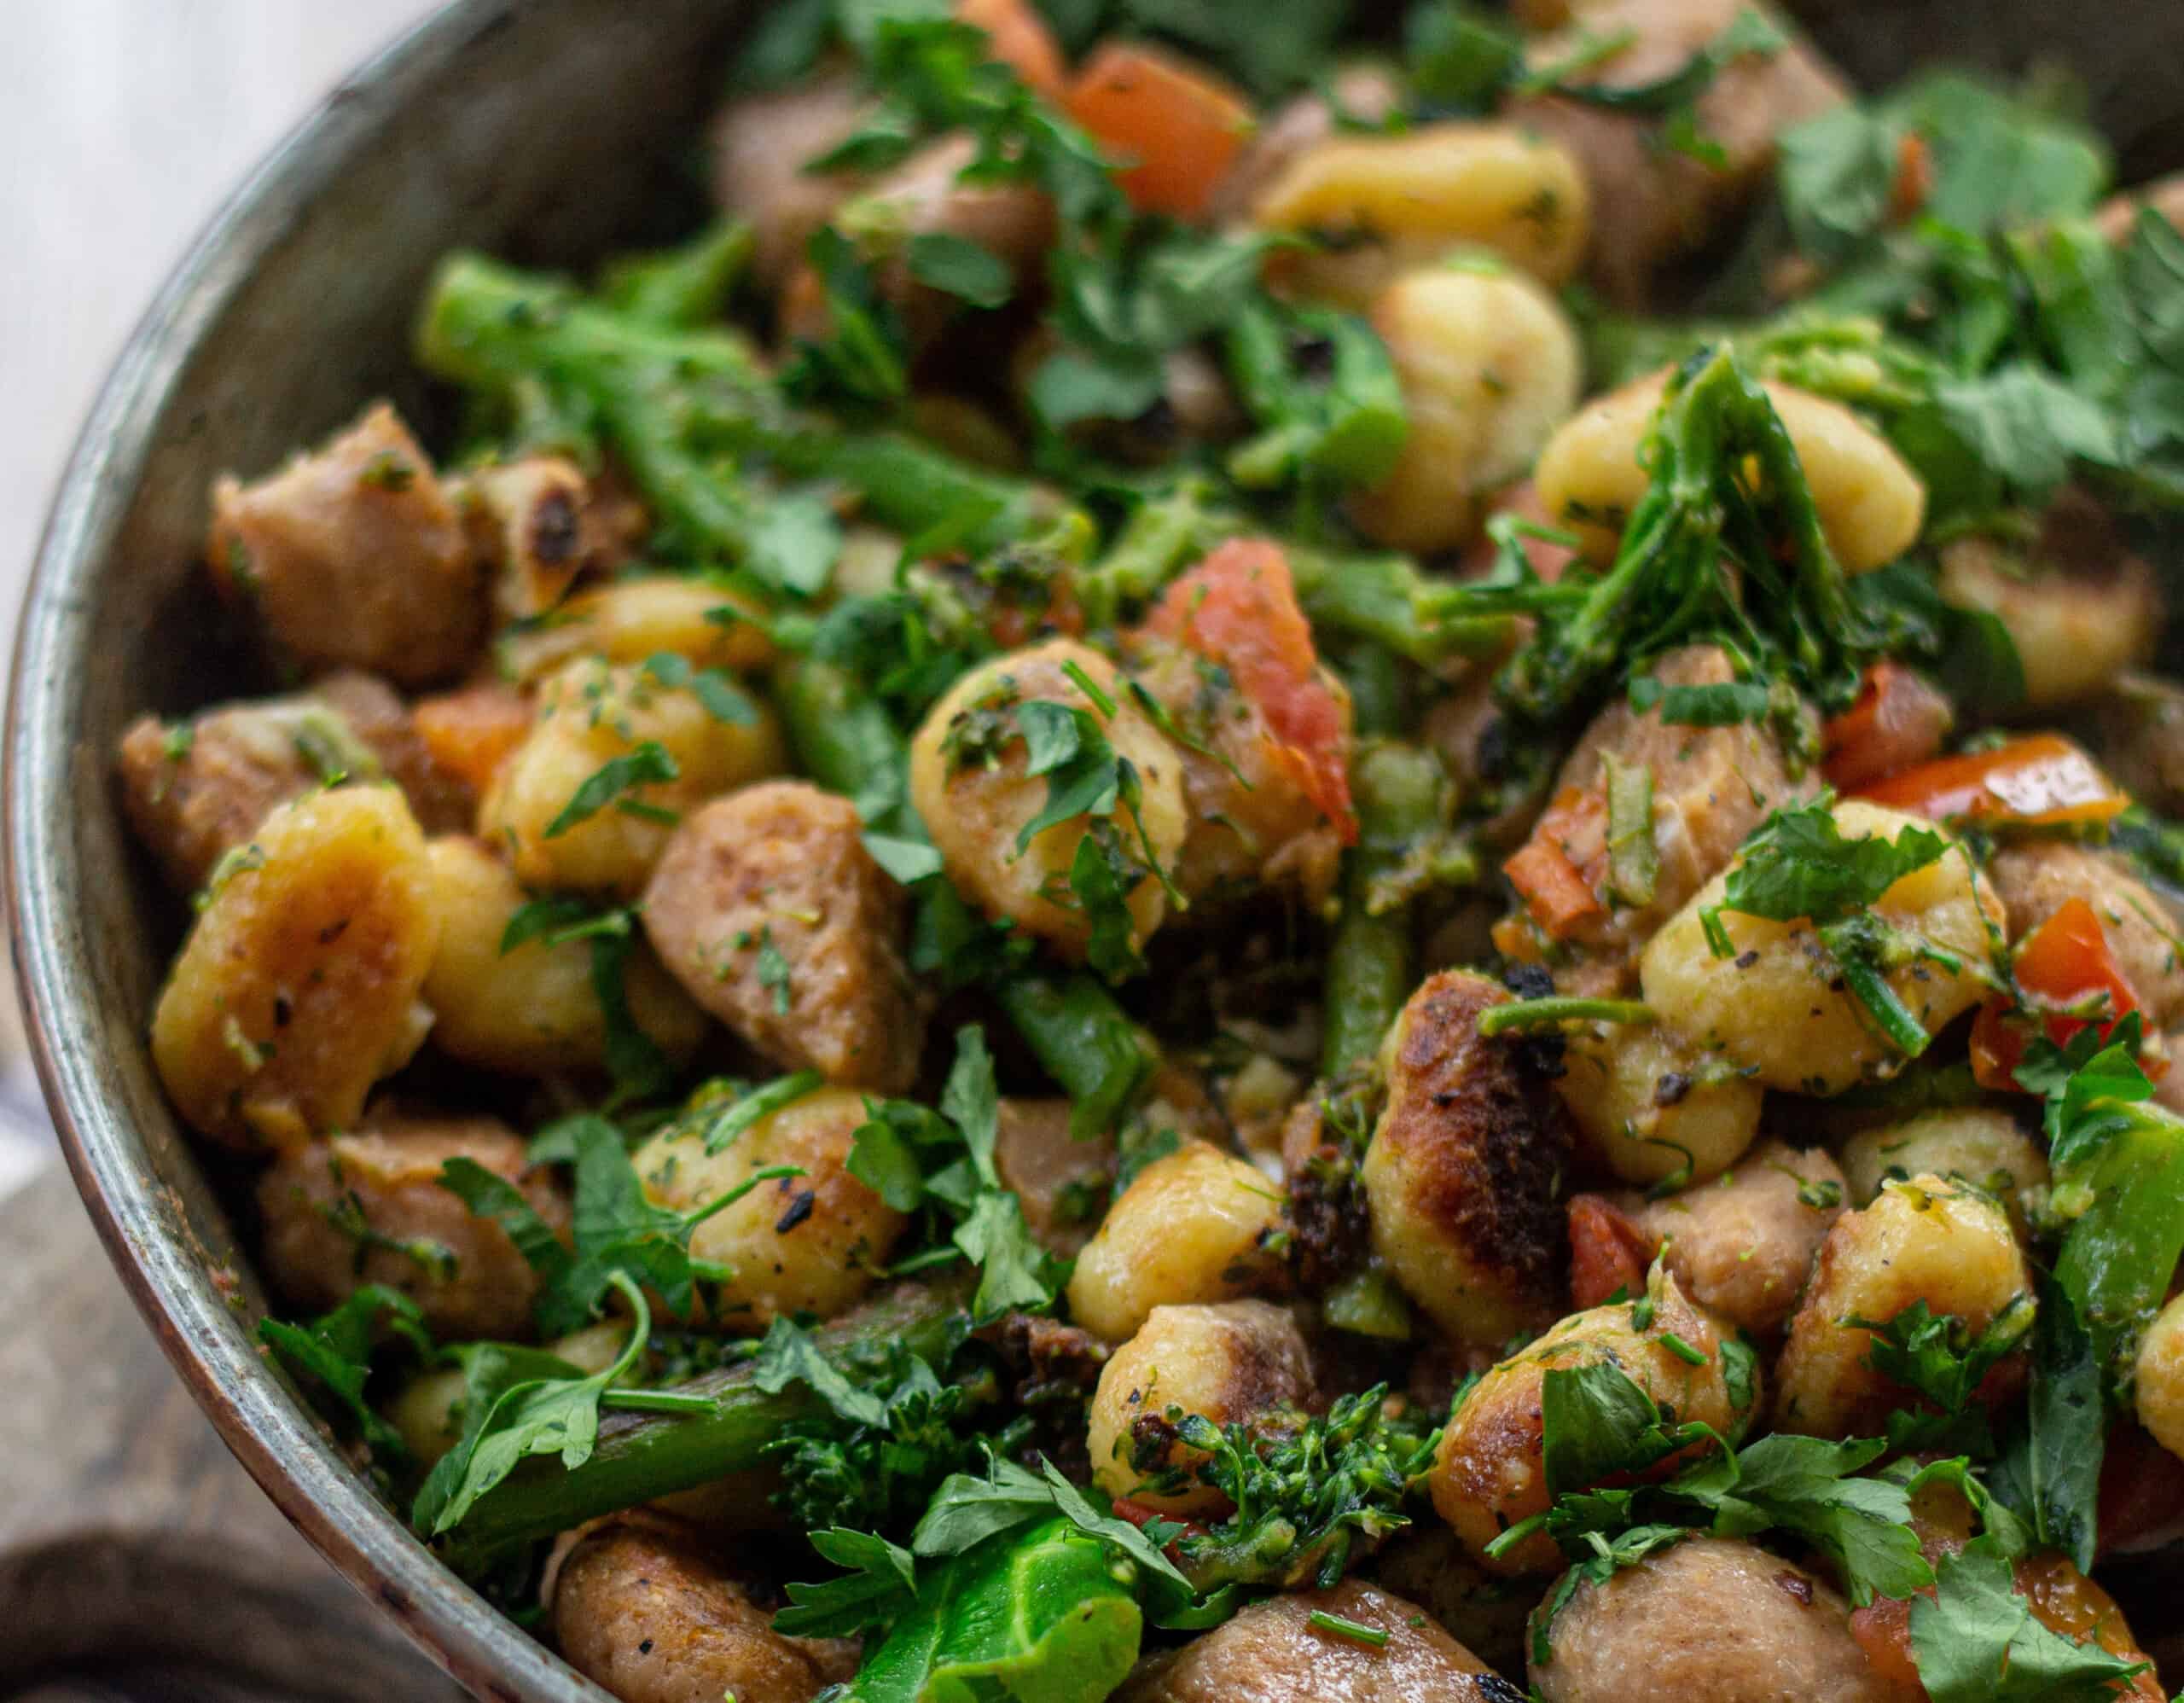 Gnocchi with Sausage and Broccoli